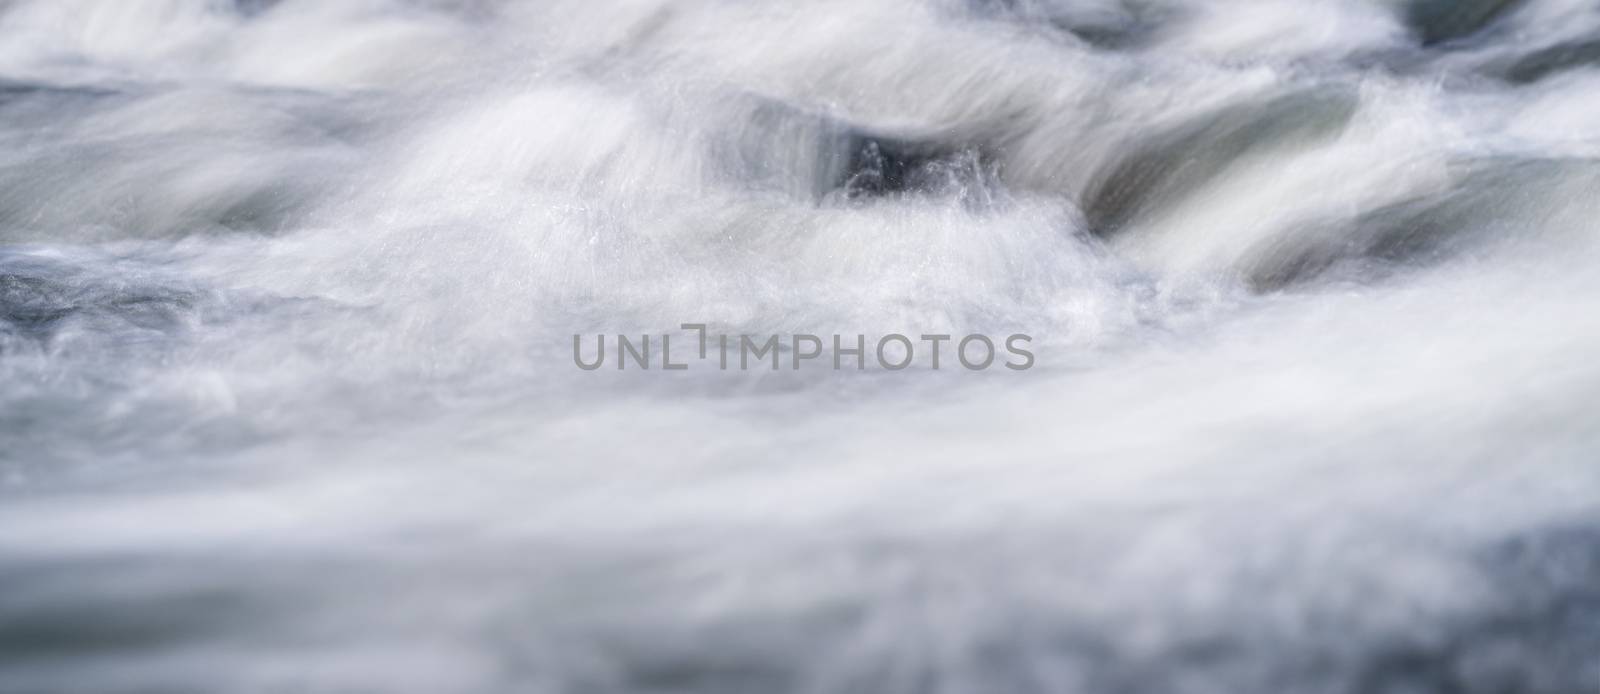 Long exposure photo - water flowing over rocks everything smooth, only few waterdrops in focus by Ivanko